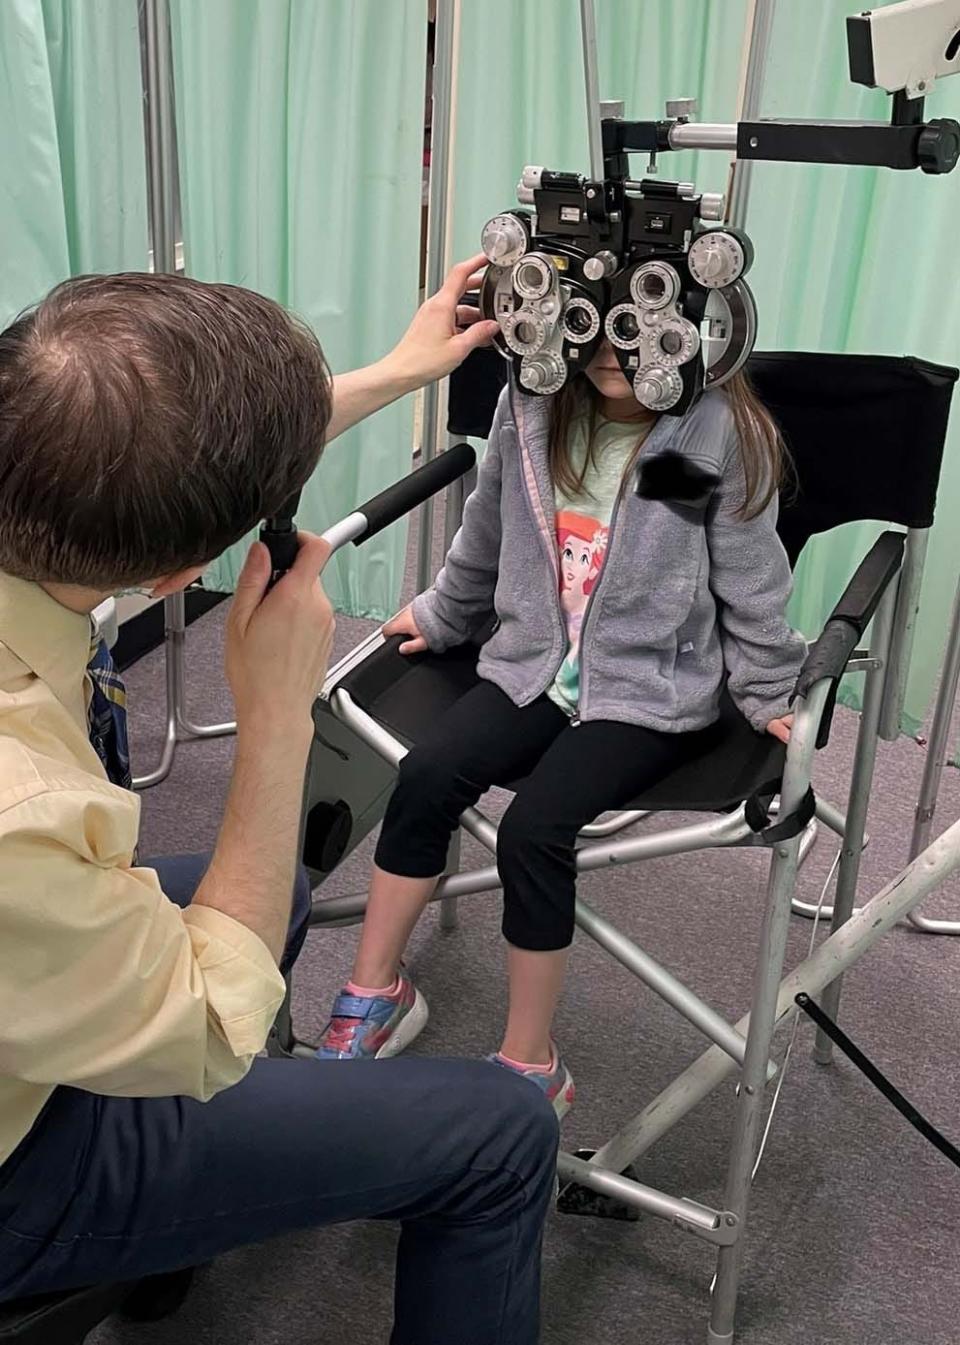 August is Amblyopia Awareness Month, a campaign to educate families on the condition known as "lazy eye." It's the most common cause of permanent vision loss in children, yet fewer than 20% of preschoolers are screened for vision problems.